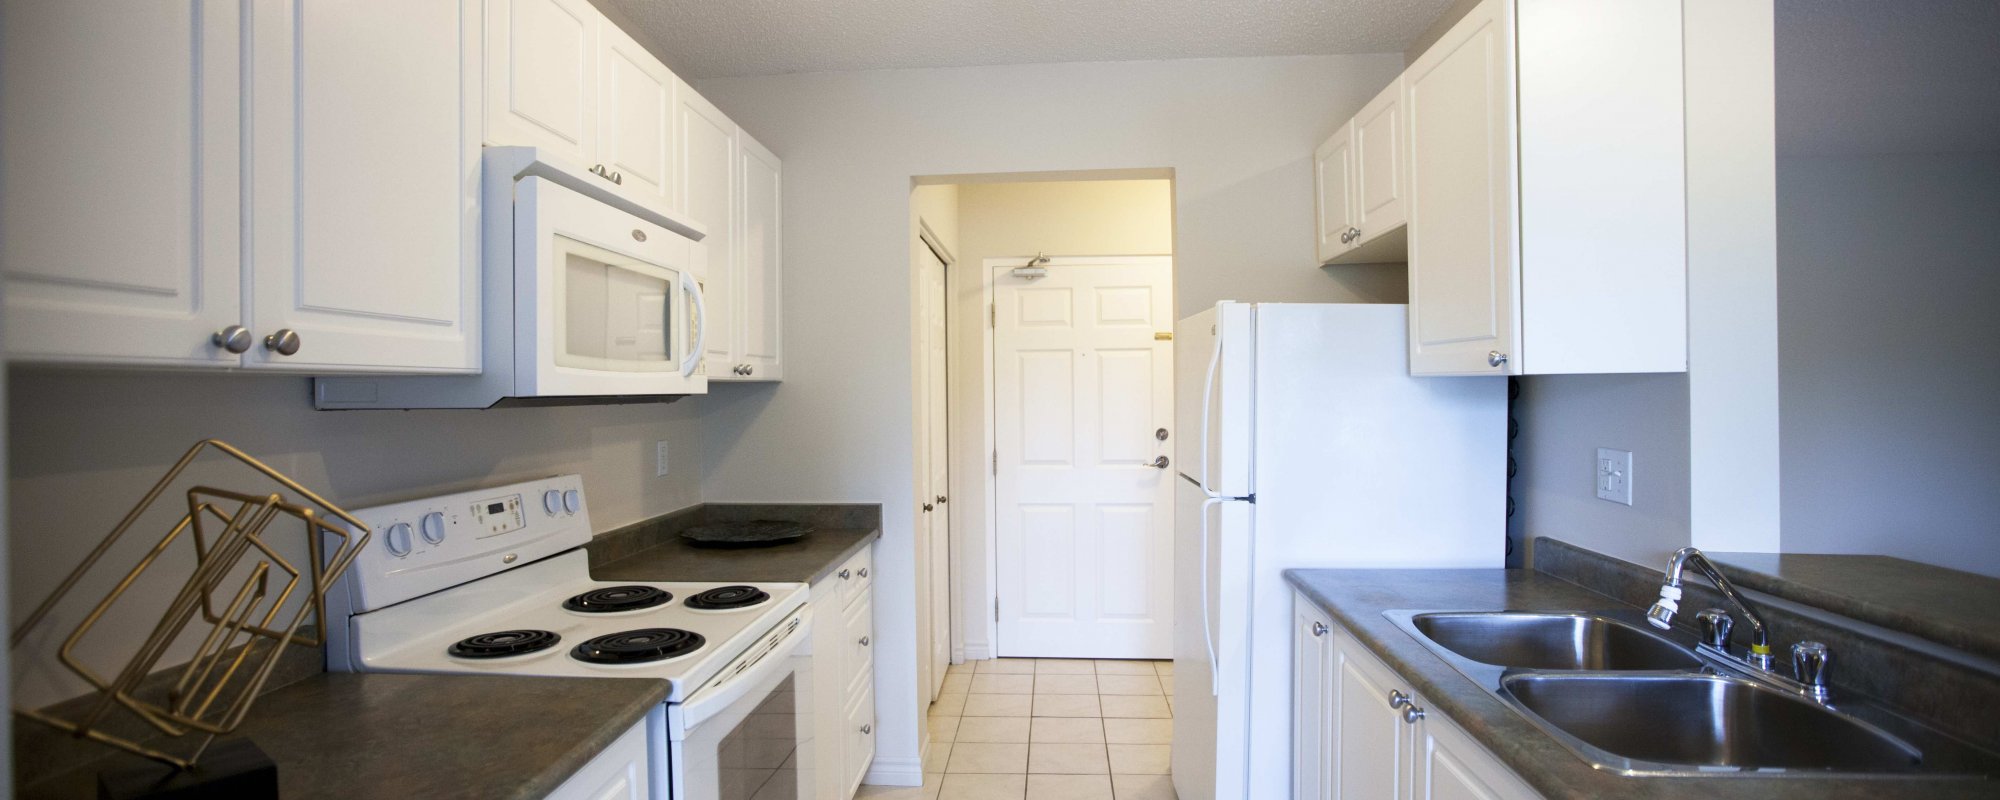 Kitchen in an apartment at Proudfoot Place in London, Ontario